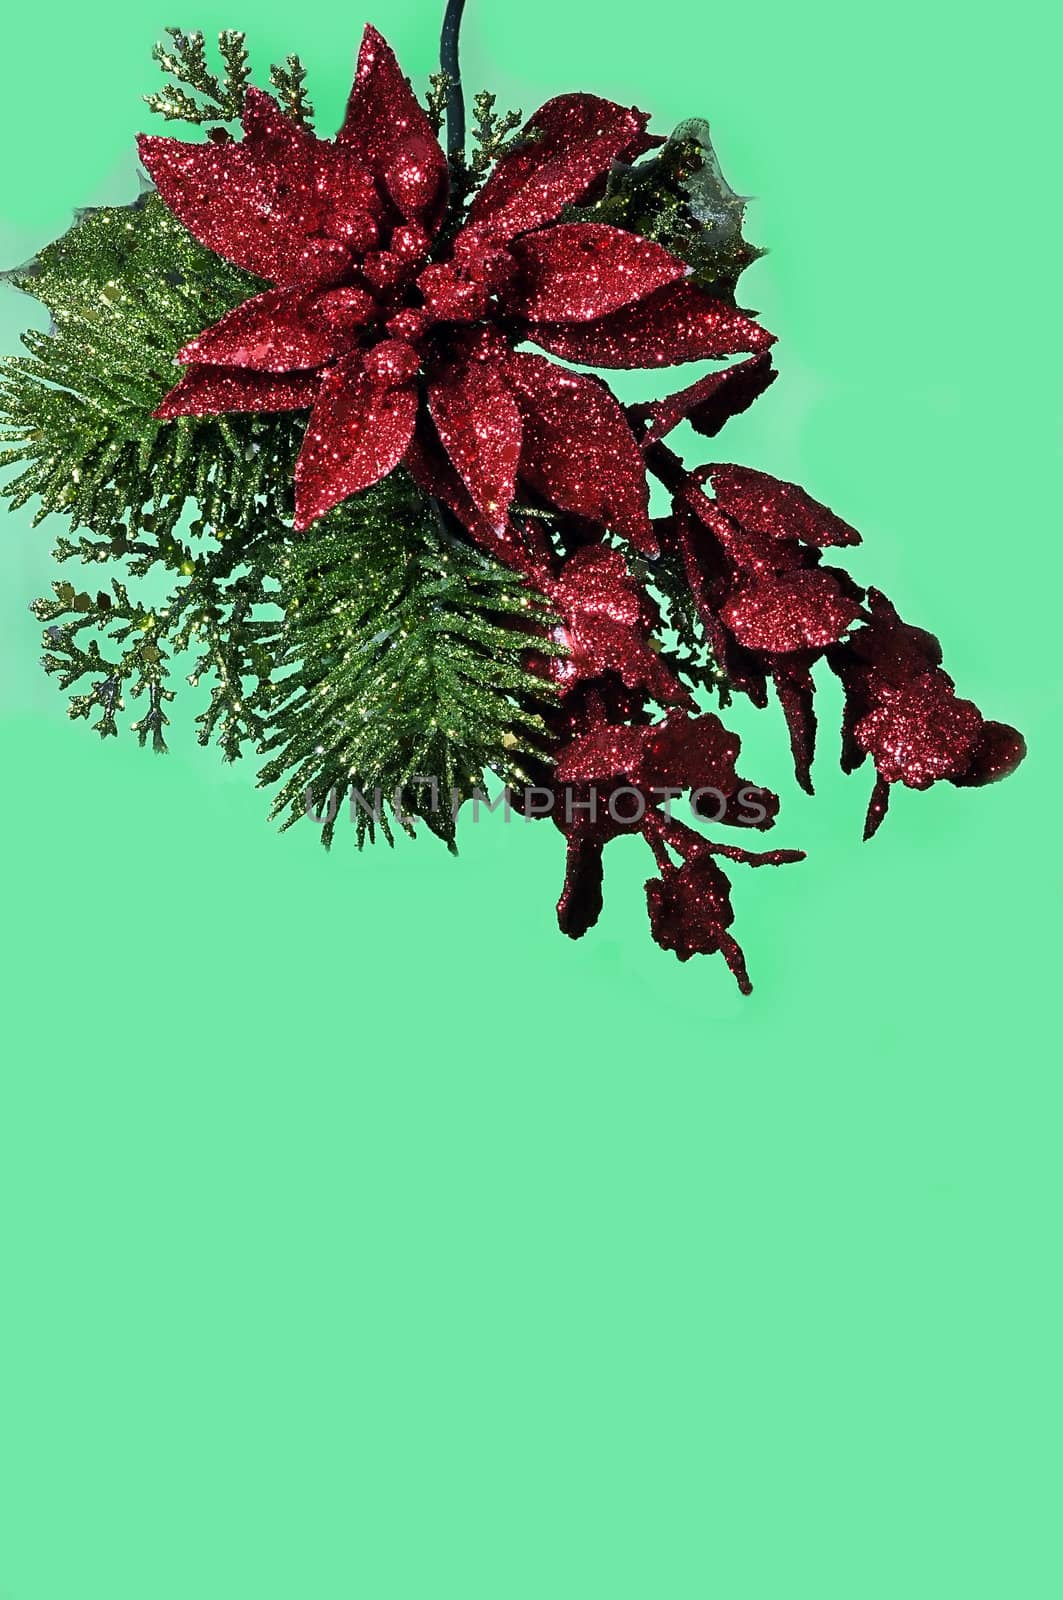 Christmas Ornament Isolated on Green by dehooks